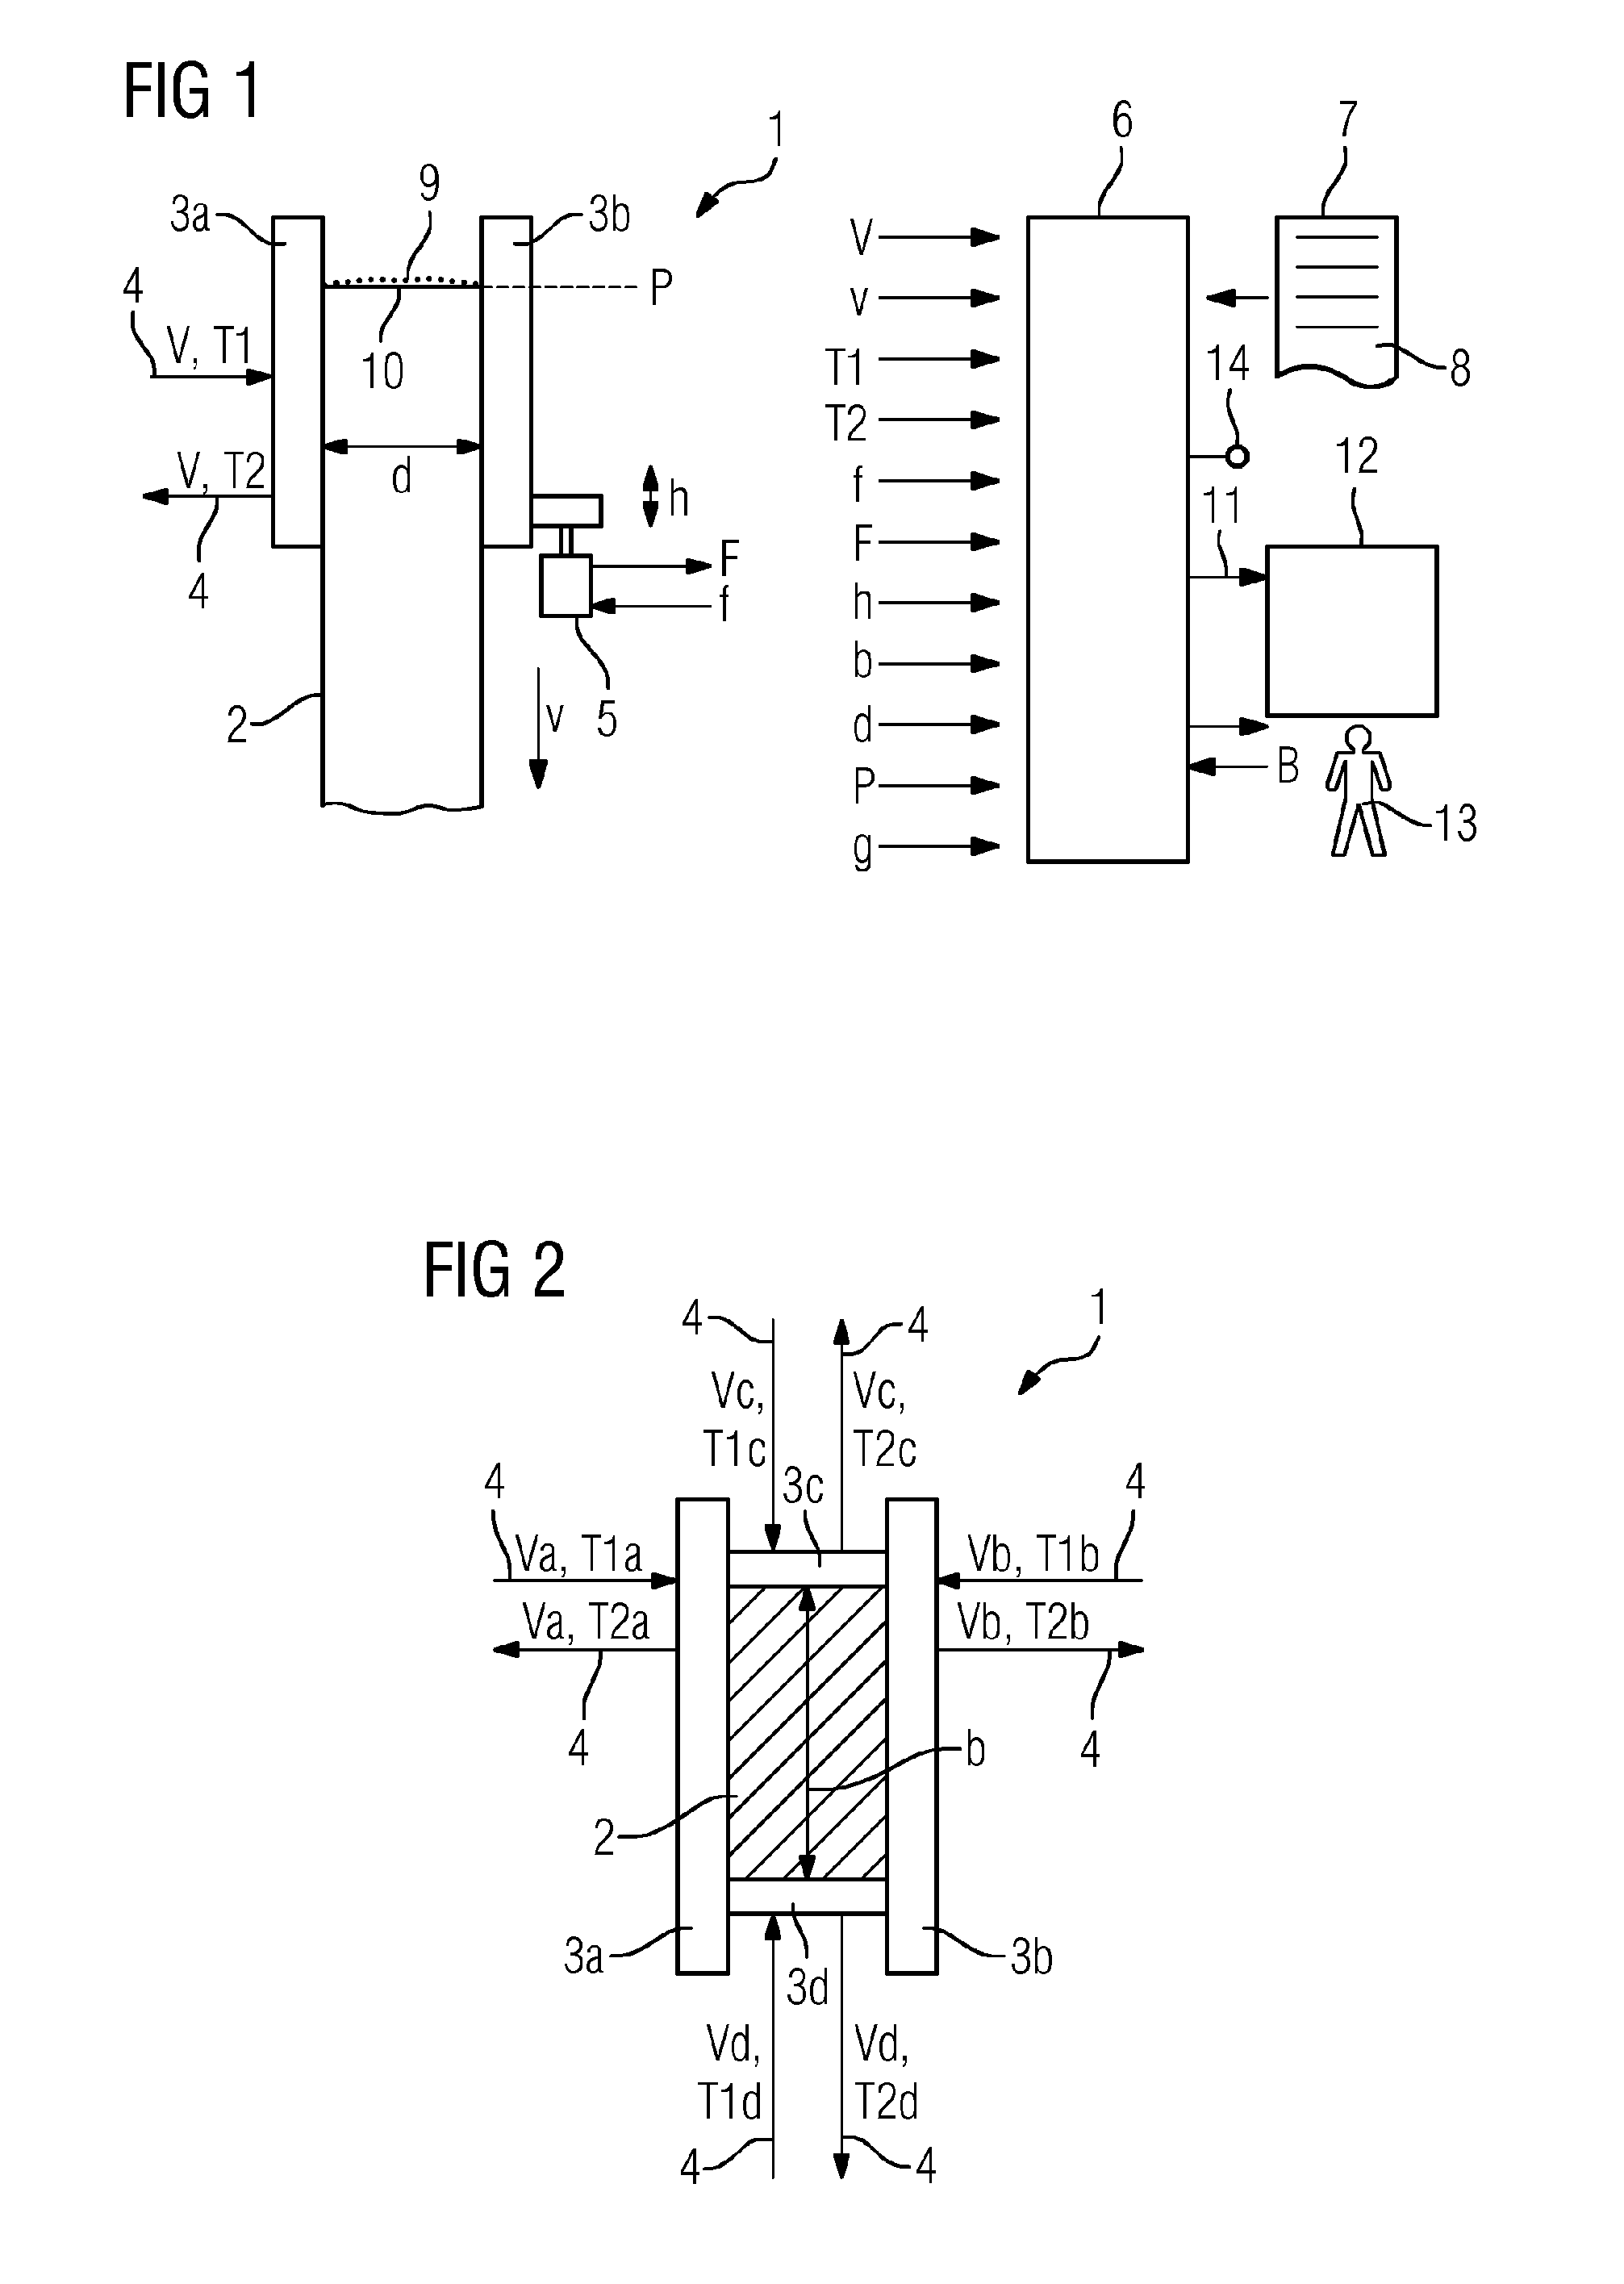 Monitoring method for a continuous casting mould including building up a database